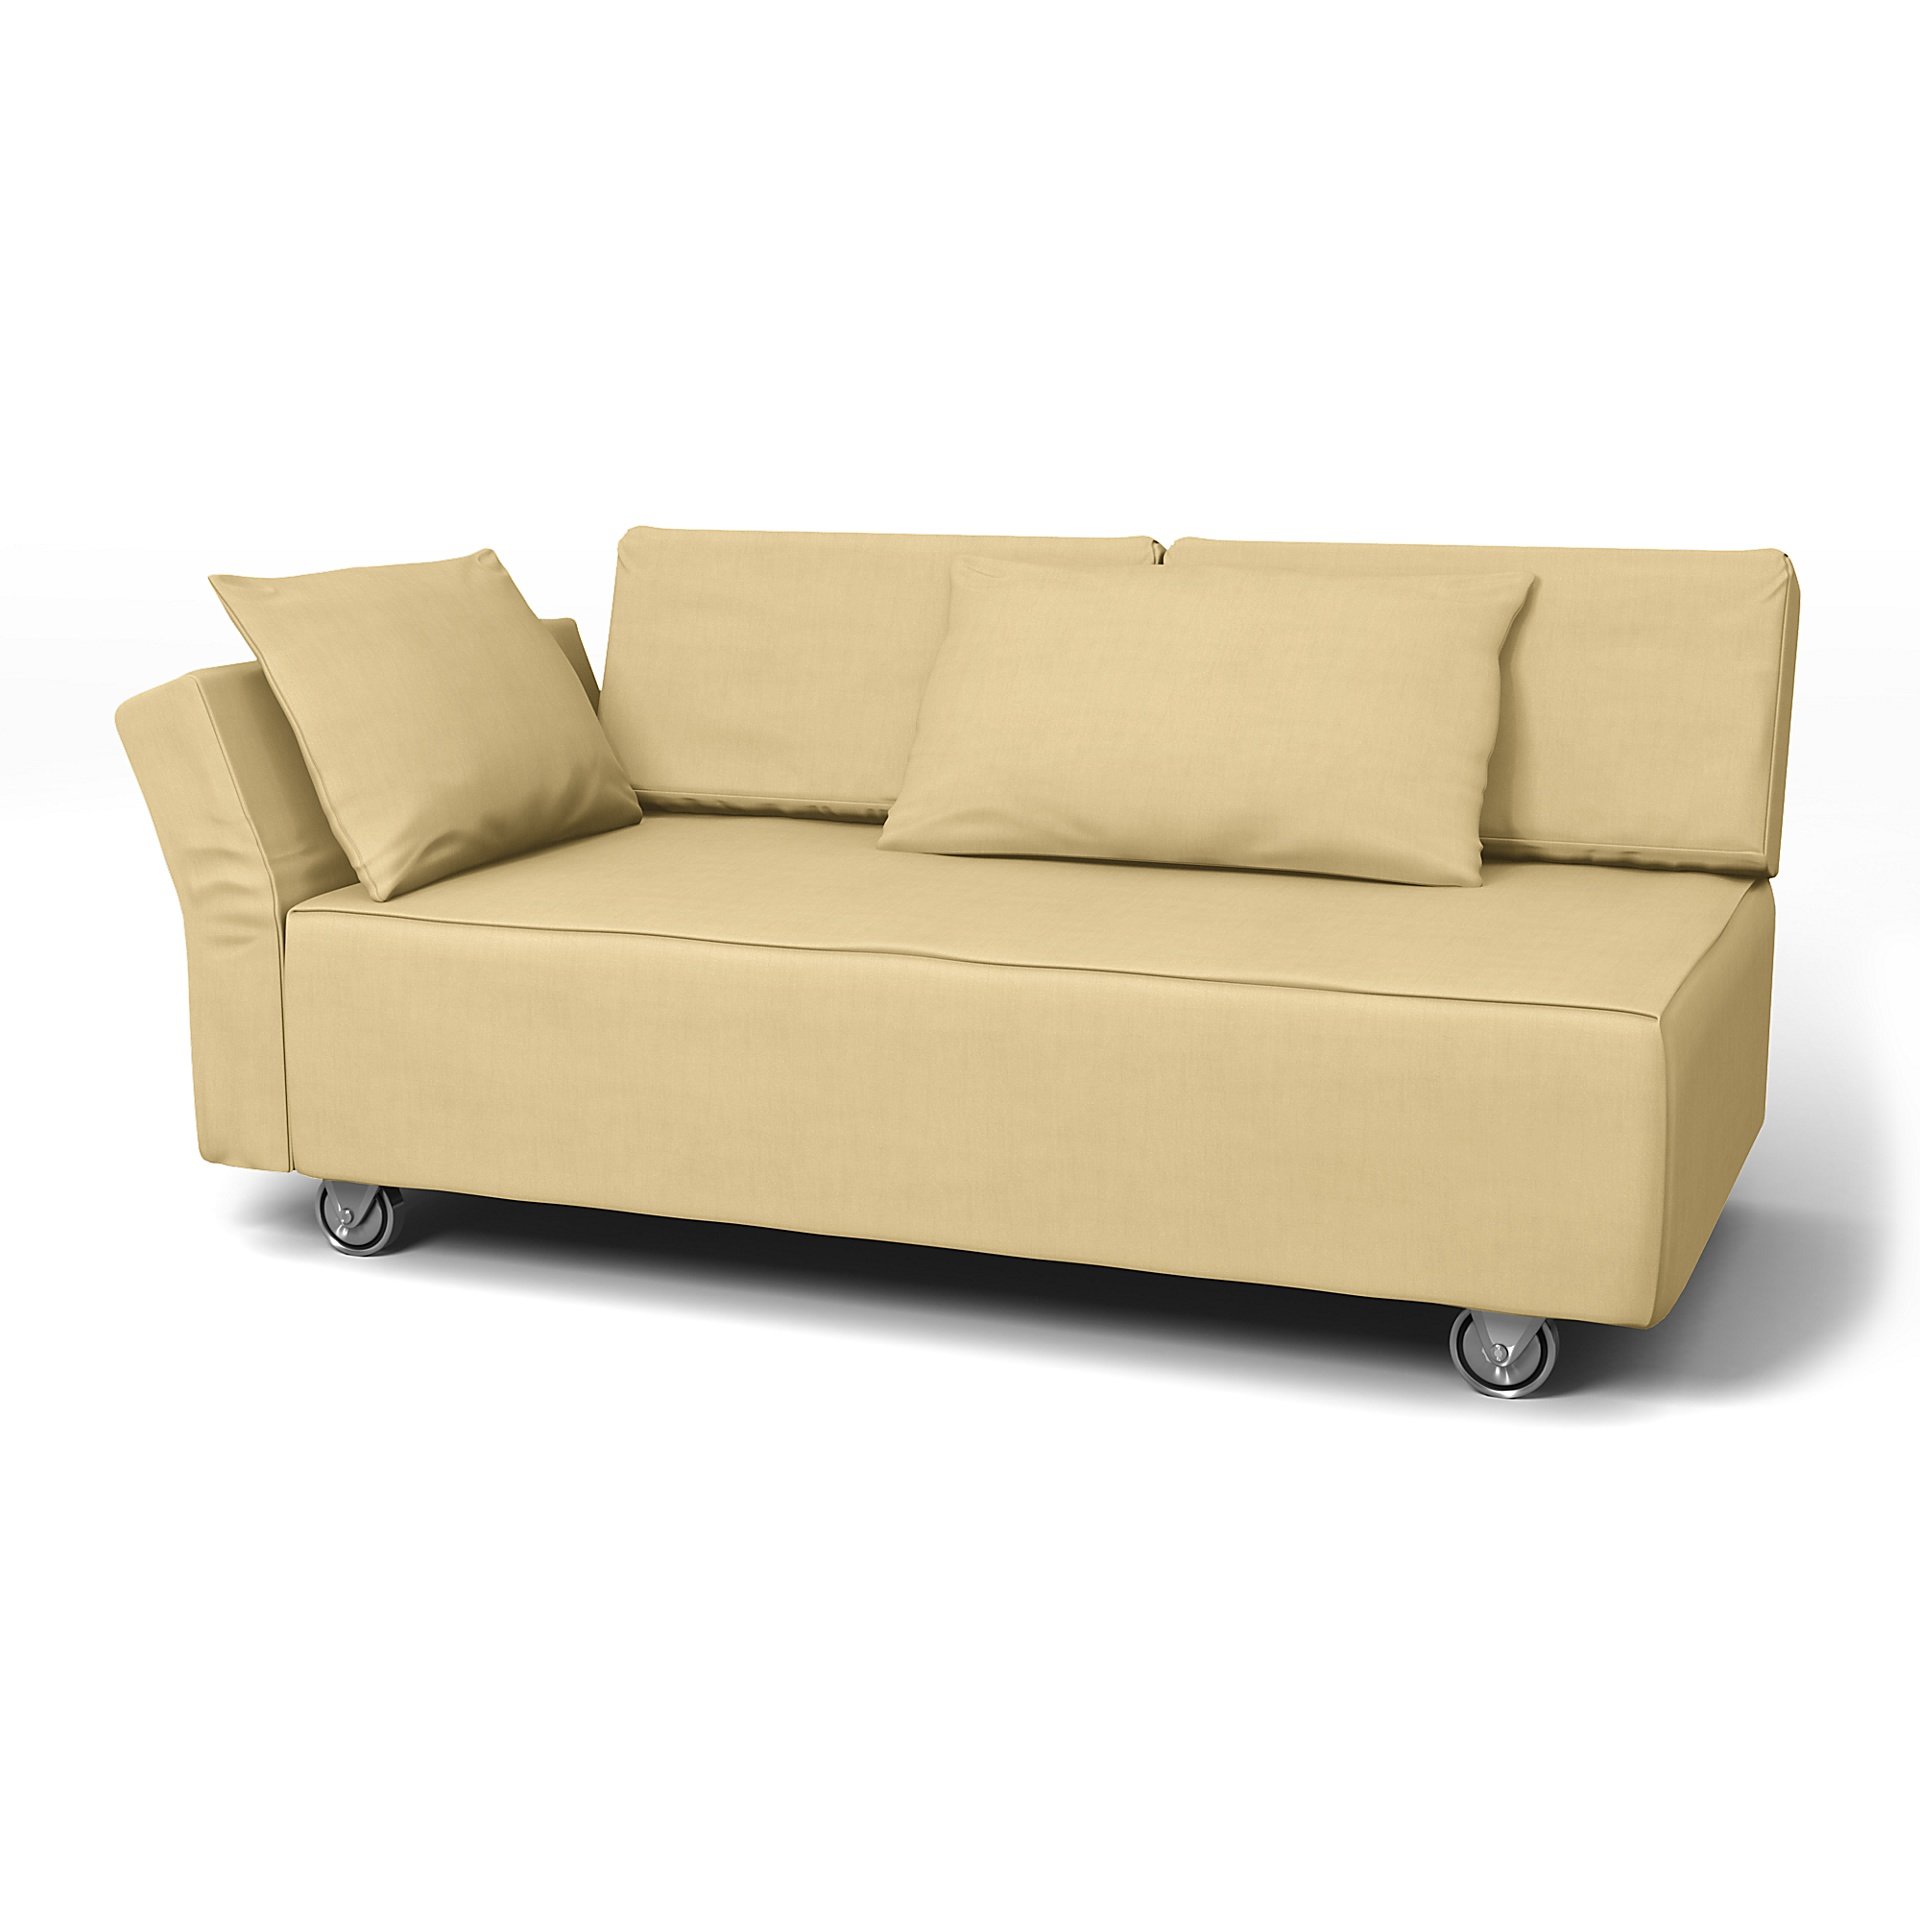 IKEA - Falsterbo 2 Seat Sofa with Left Arm Cover, Straw Yellow, Linen - Bemz